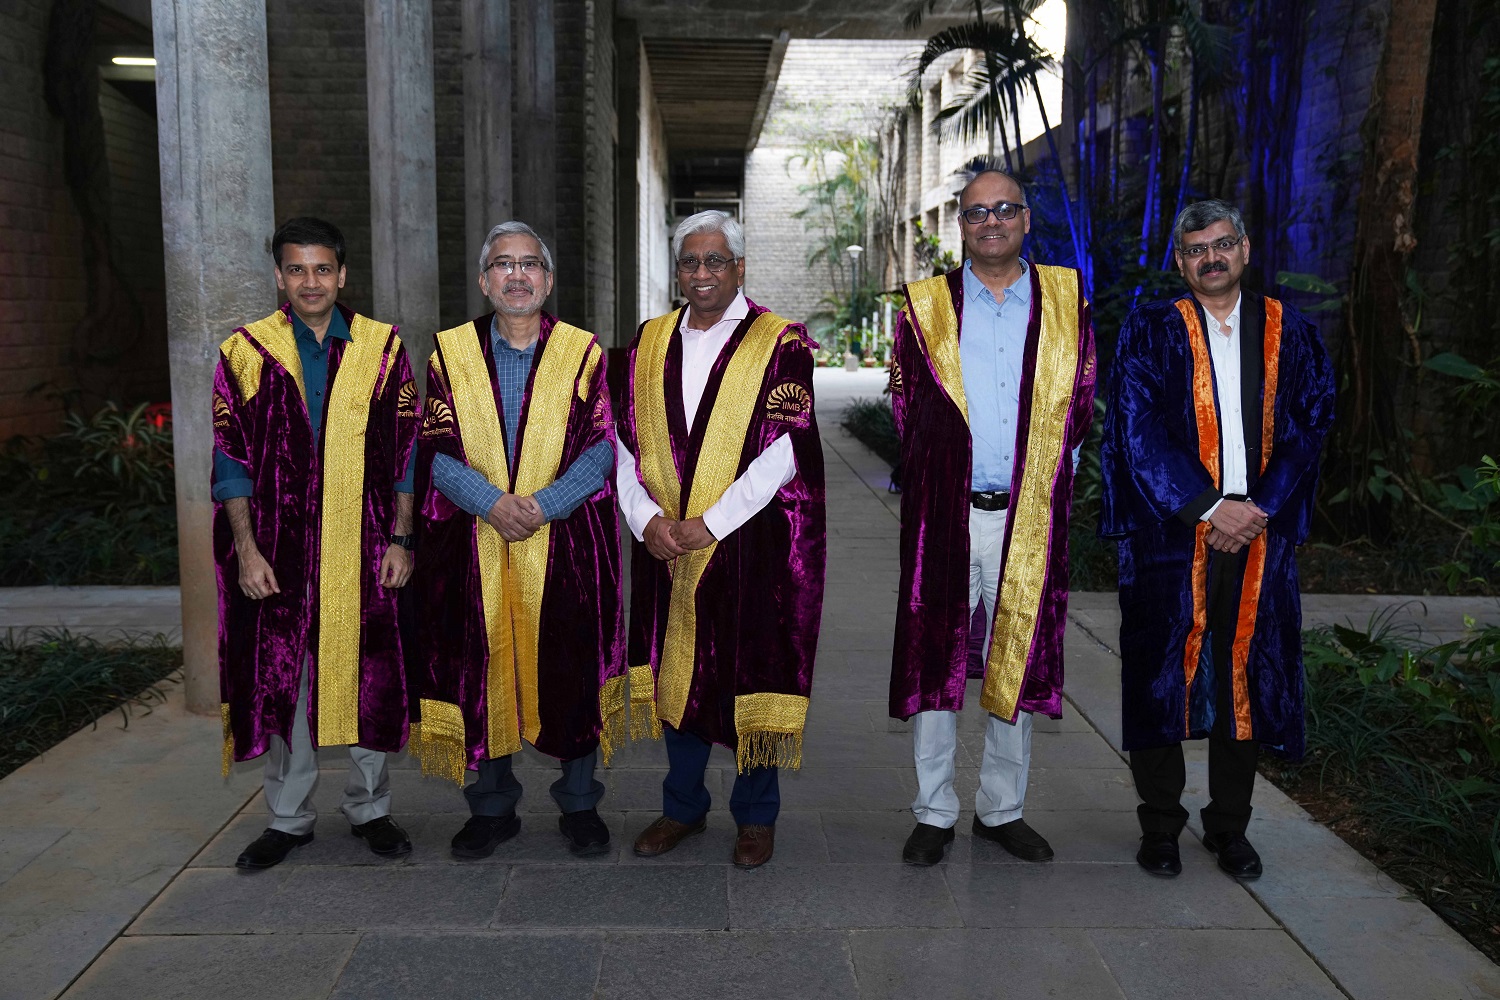 (L-R) Prof. Sourav Mukherji, Dean, Alumni Relations & Development, Prof. Rahul Dé, Dean, Programmes, Prof. Rajendra K Bandi, Dean, Administration, Prof. Chetan Subramanian, Dean Faculty, and Prof. Rejie George Pallathitta, faculty in the Strategy area, at the start of the convocation.